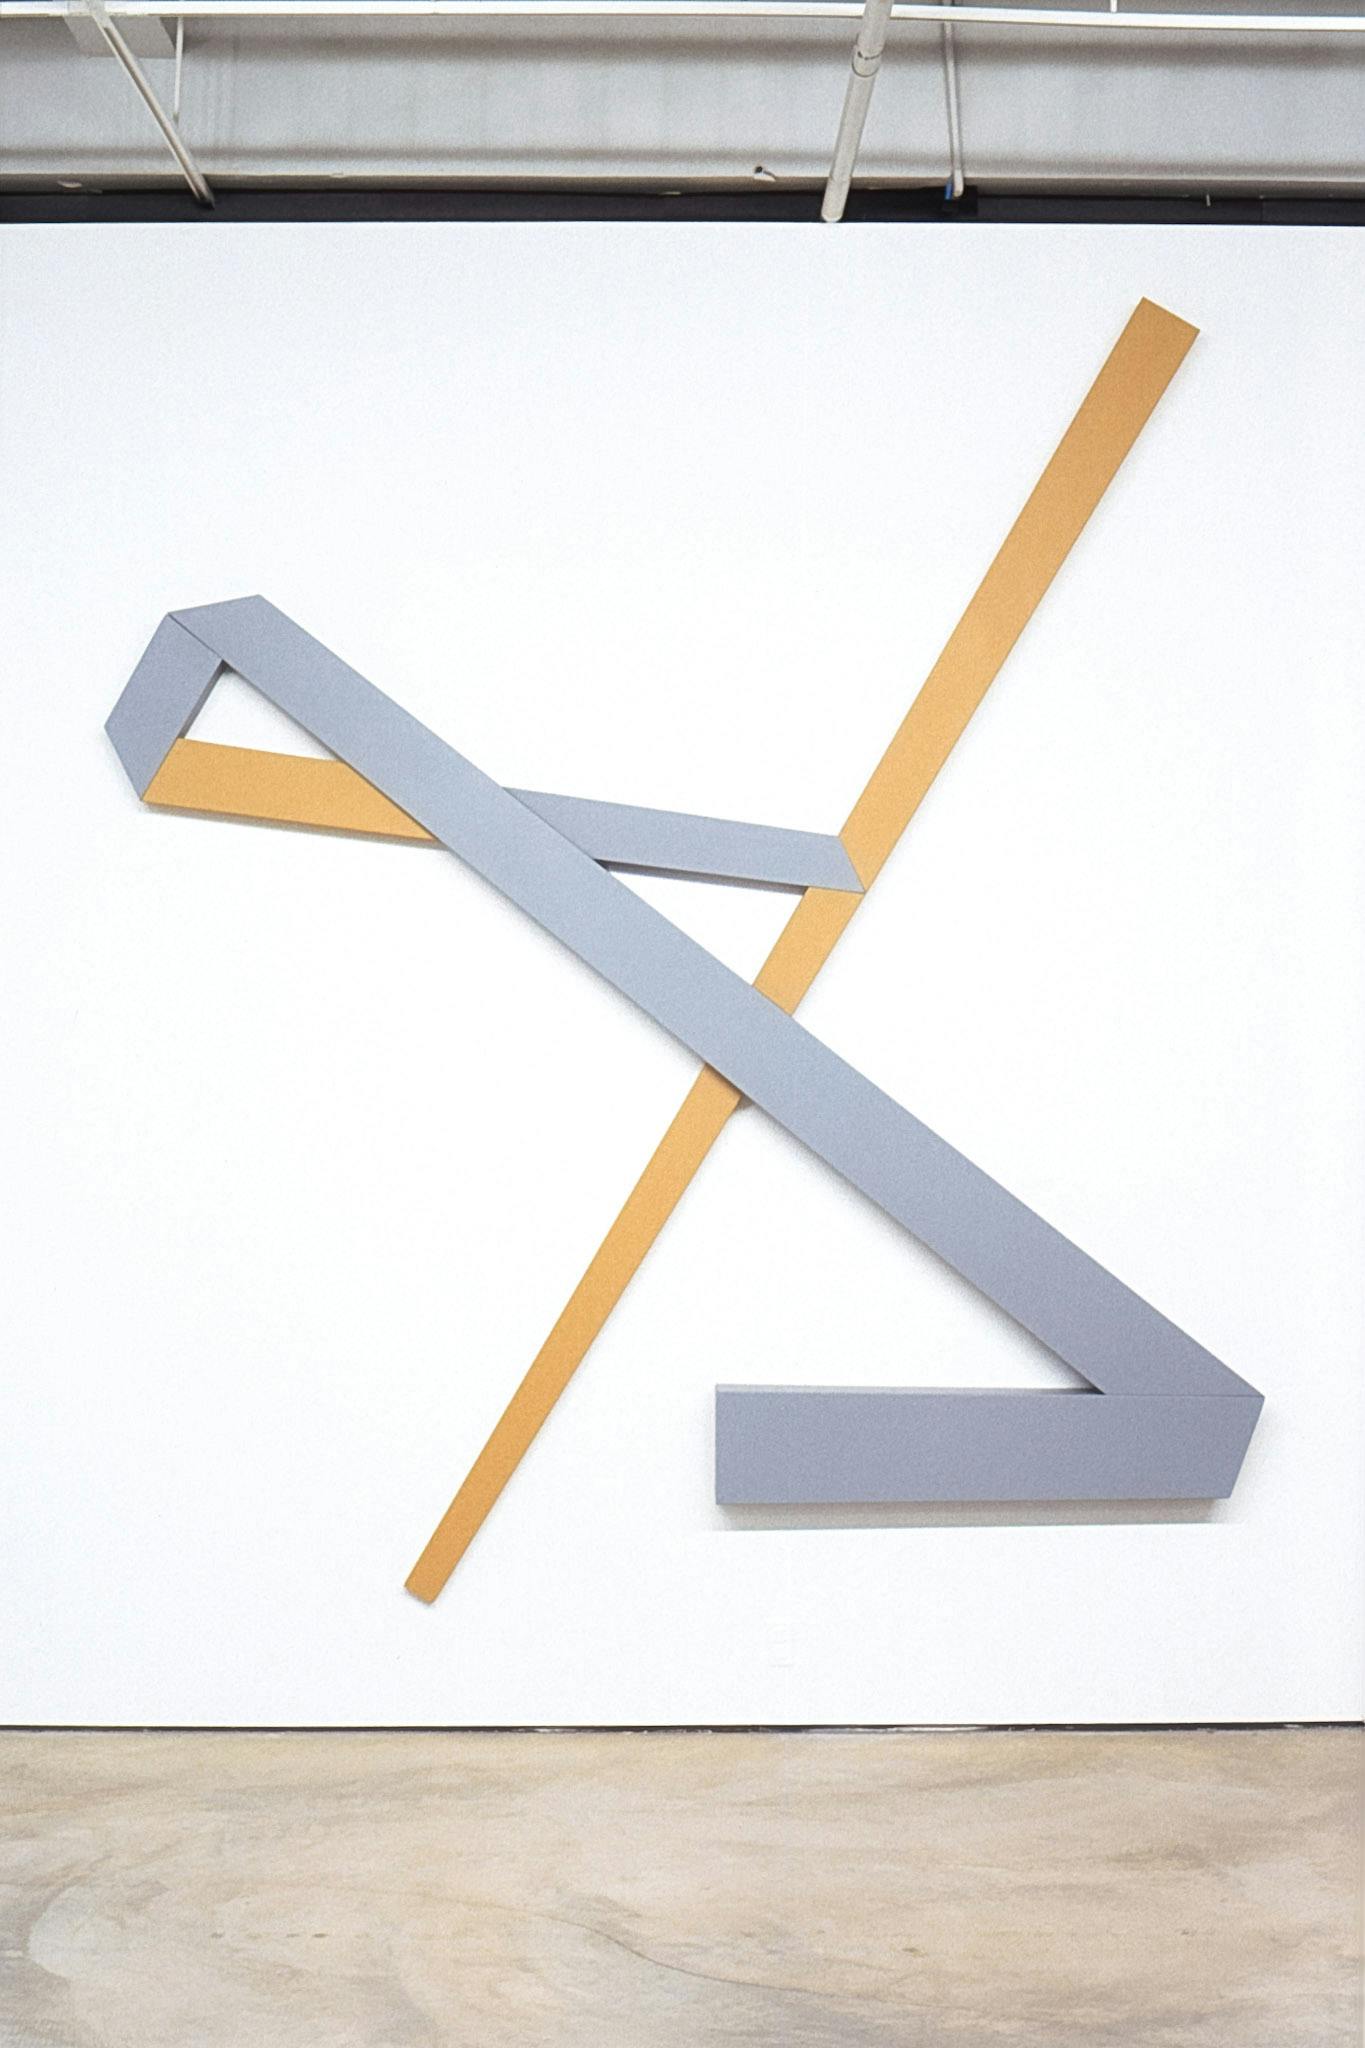 A large-sized geometric sculpture is installed on the gallery wall. A yellow diagonal line runs from the top to the bottom of the wall. This line is foregrounded by an inverted Z shape in light grey.